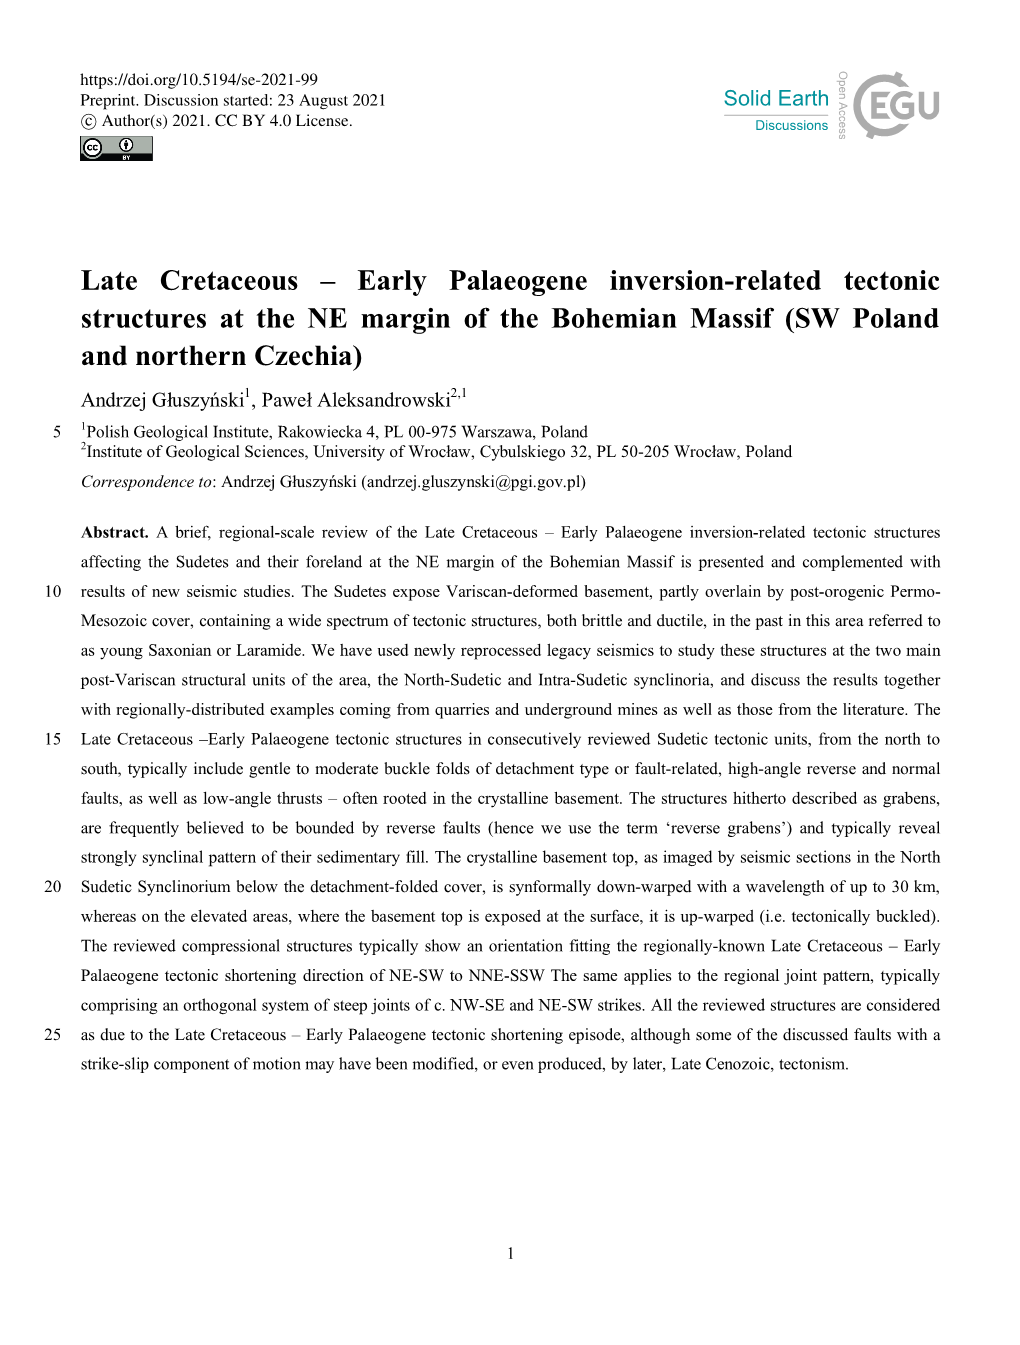 Late Cretaceous – Early Palaeogene Inversion-Related Tectonic Structures